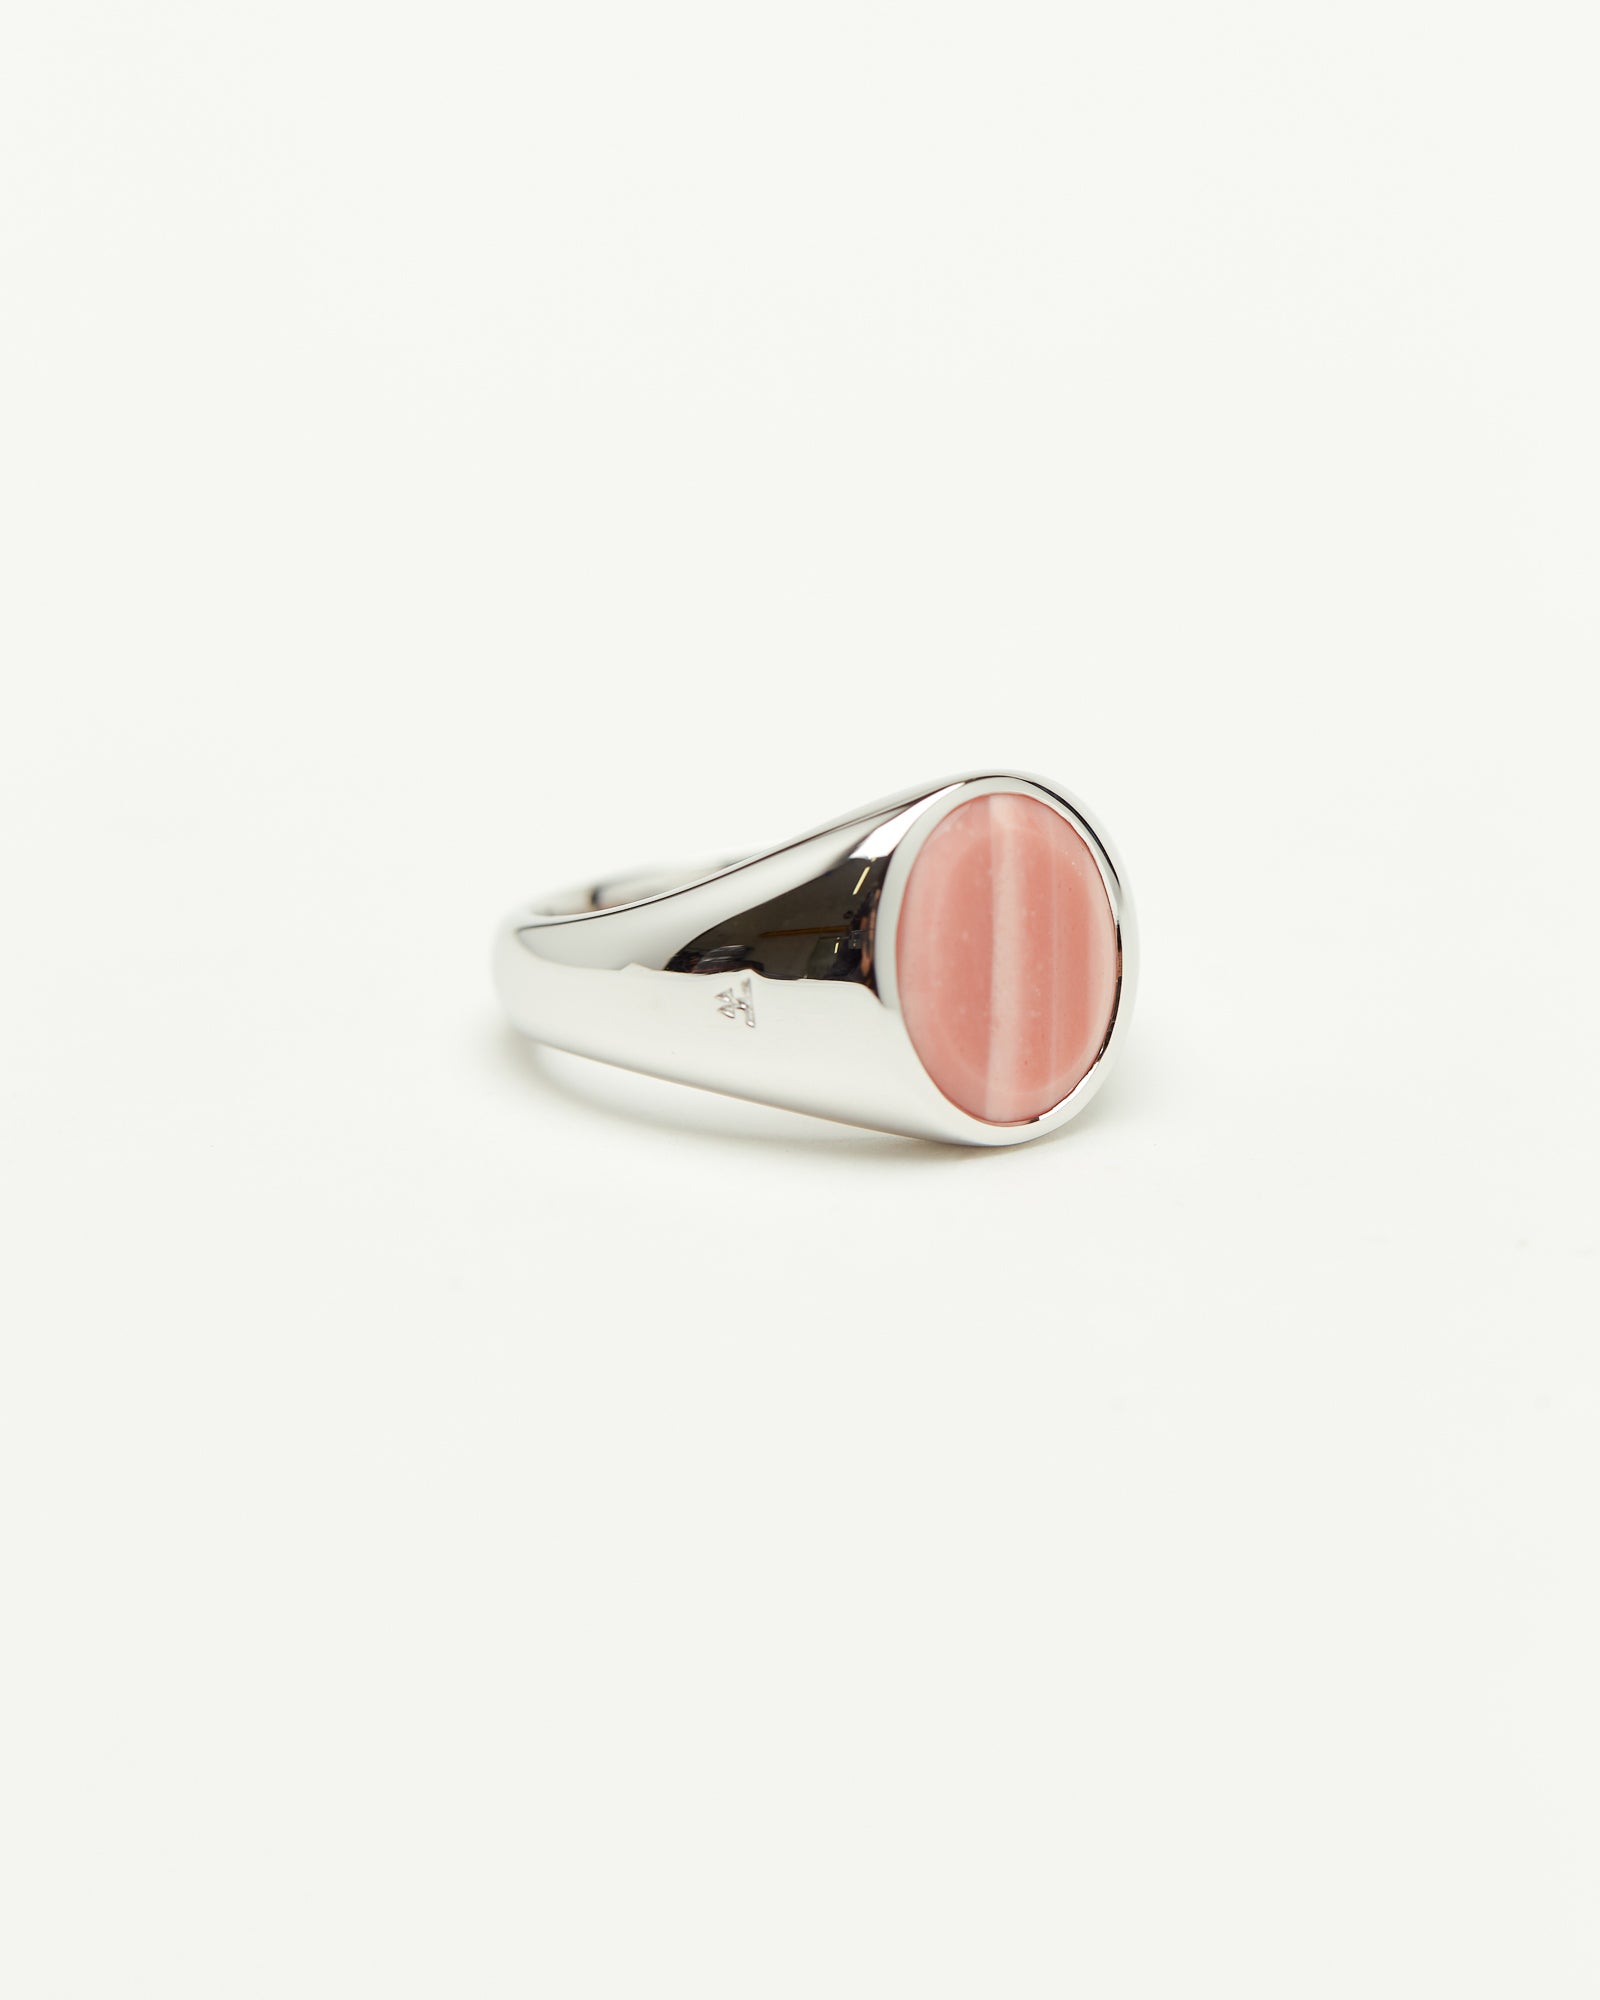 Lizzie Ring Pink Opal